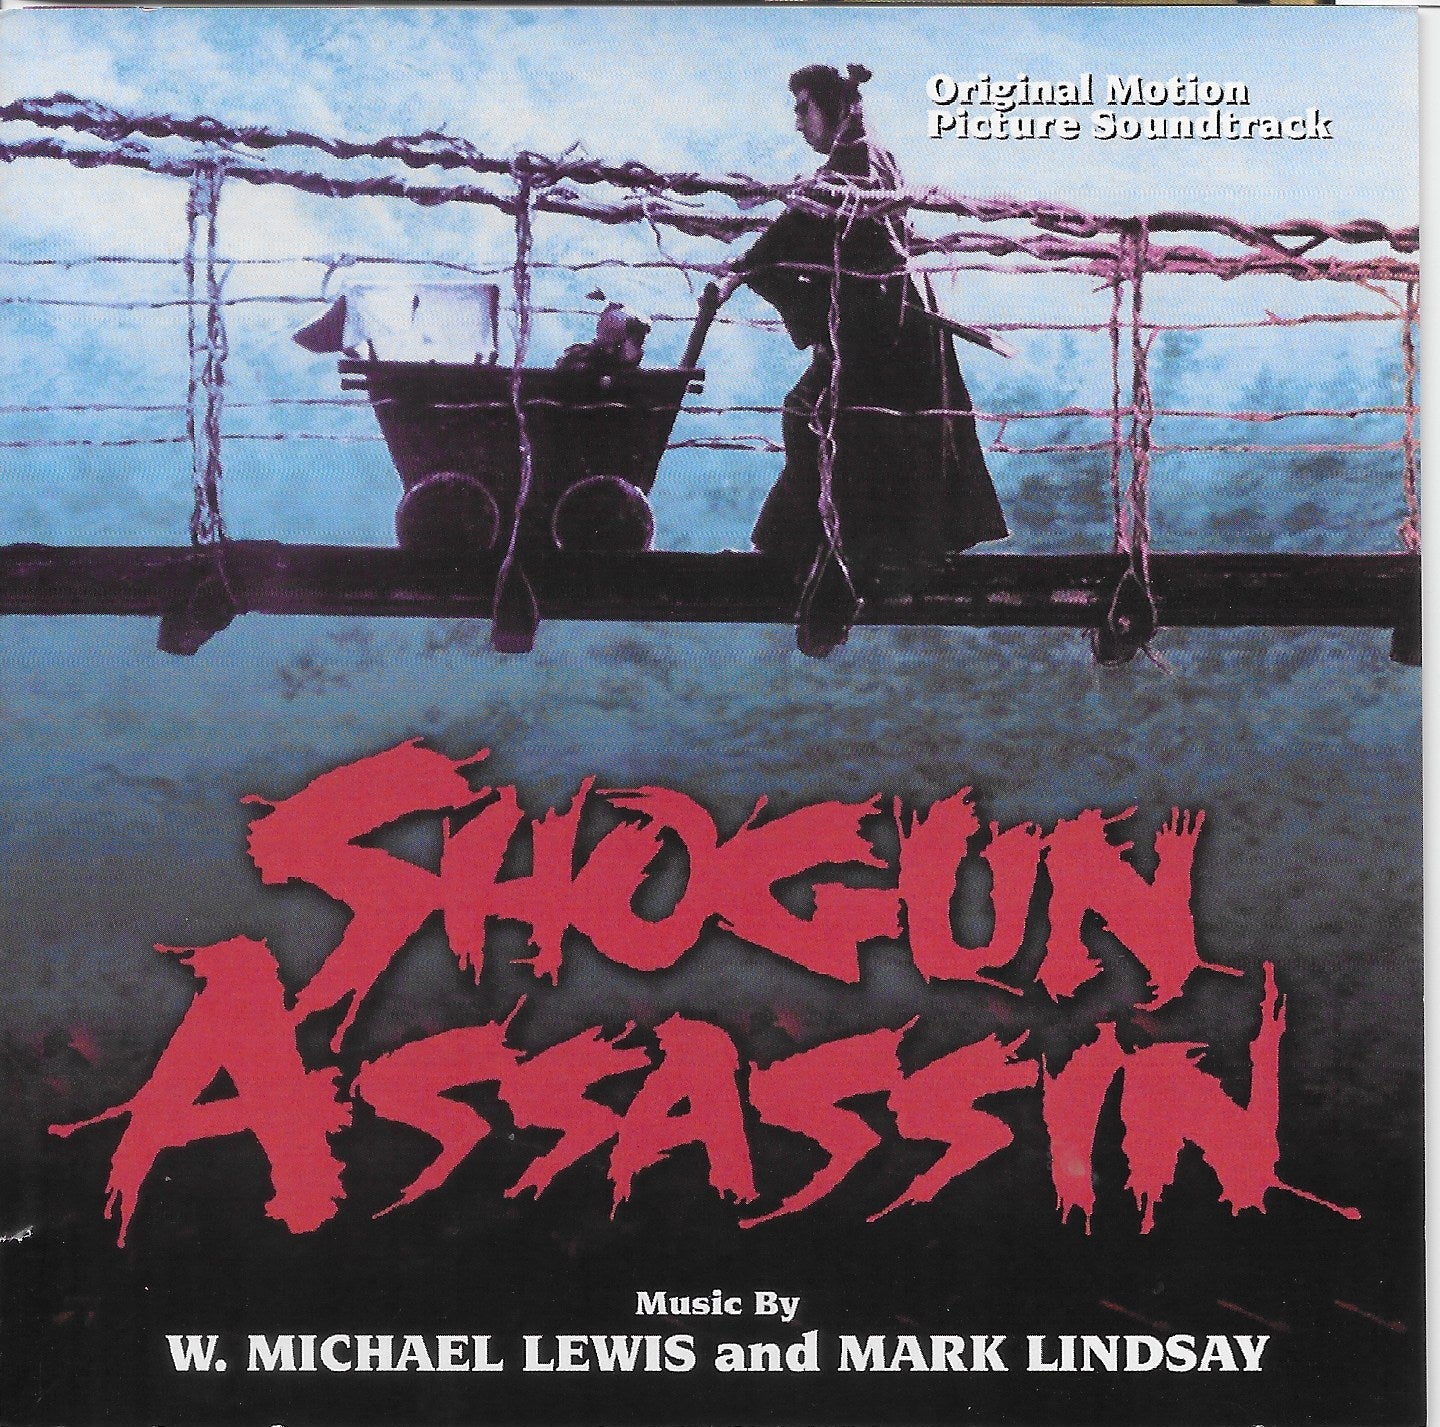 Cult-Classic Lindsay-Lewis-Scored SHOGUN ASSASSIN Original Tape Box 1 + CD - Personally Autographed to YOU